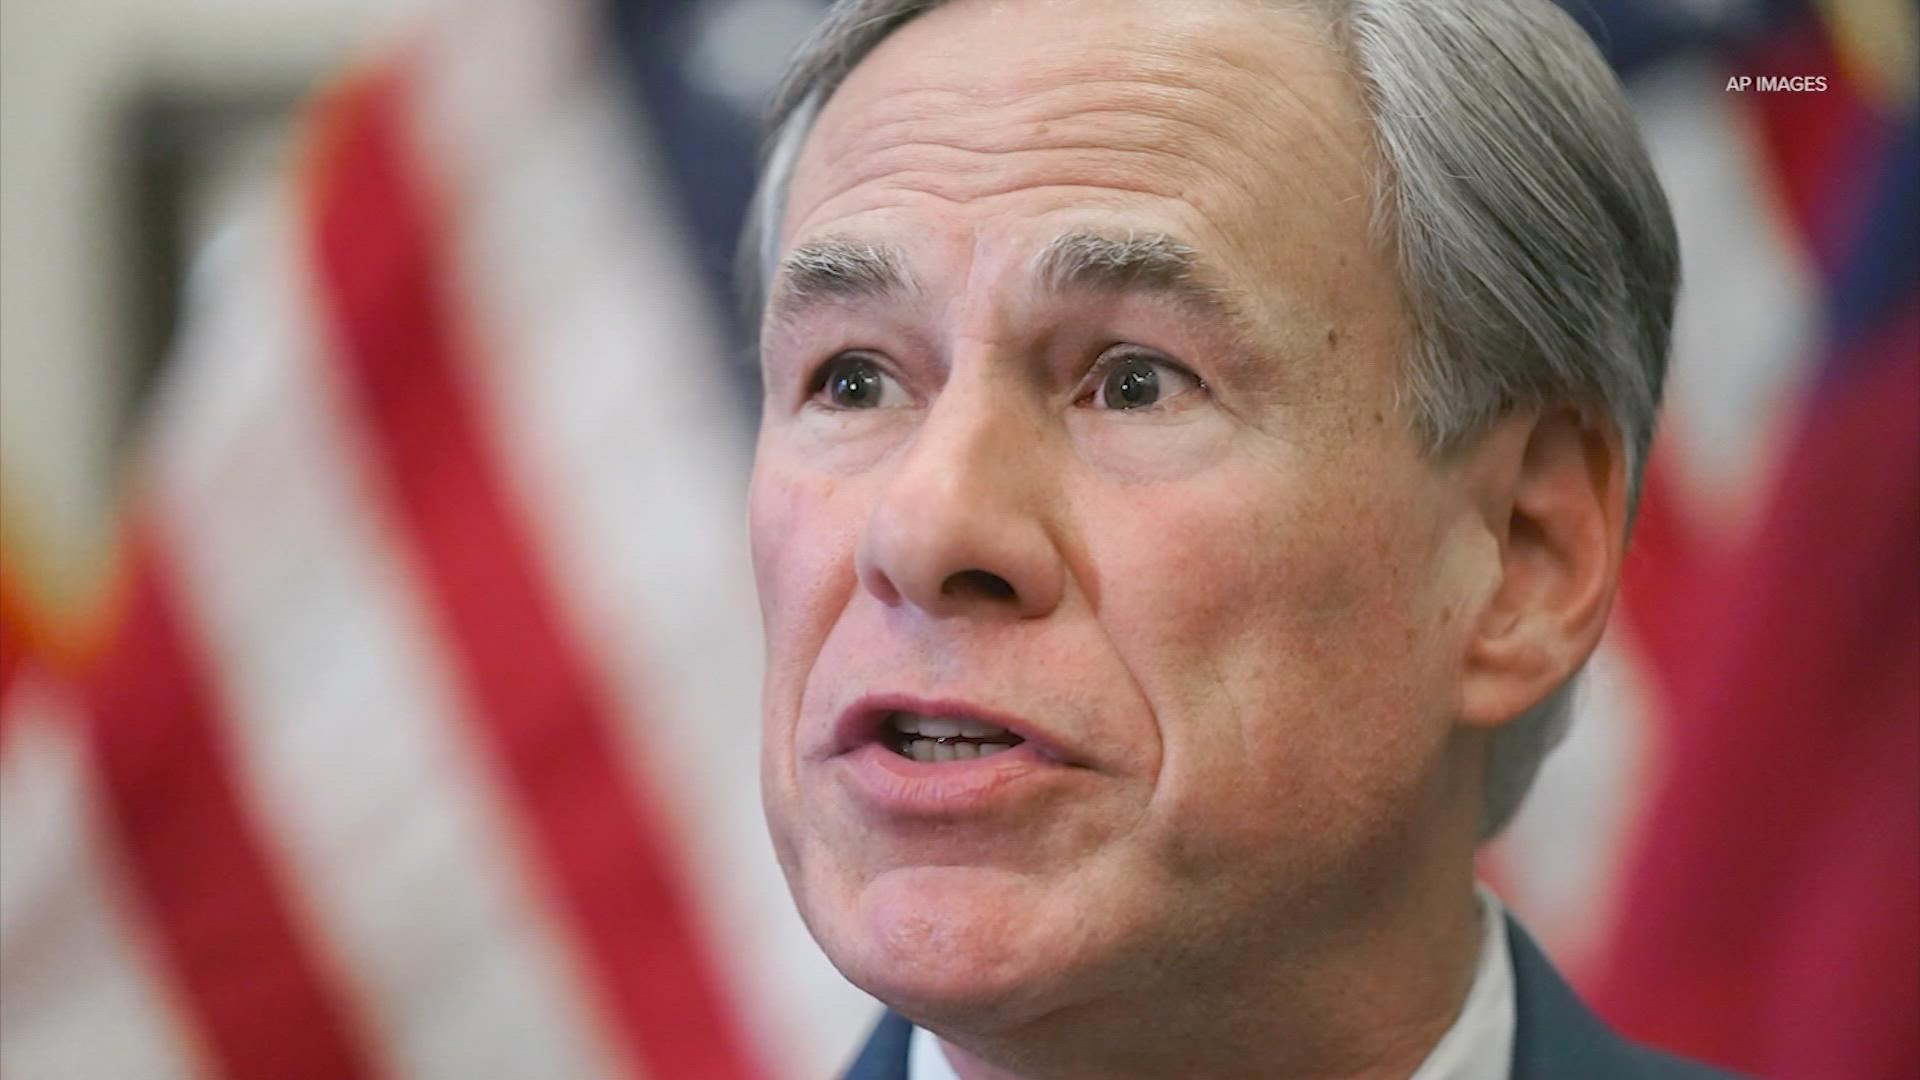 Gov. Greg Abbott said Wednesday that Texas will provide charter buses so migrants can be sent to Washington, D.C., directly to the Biden administration.